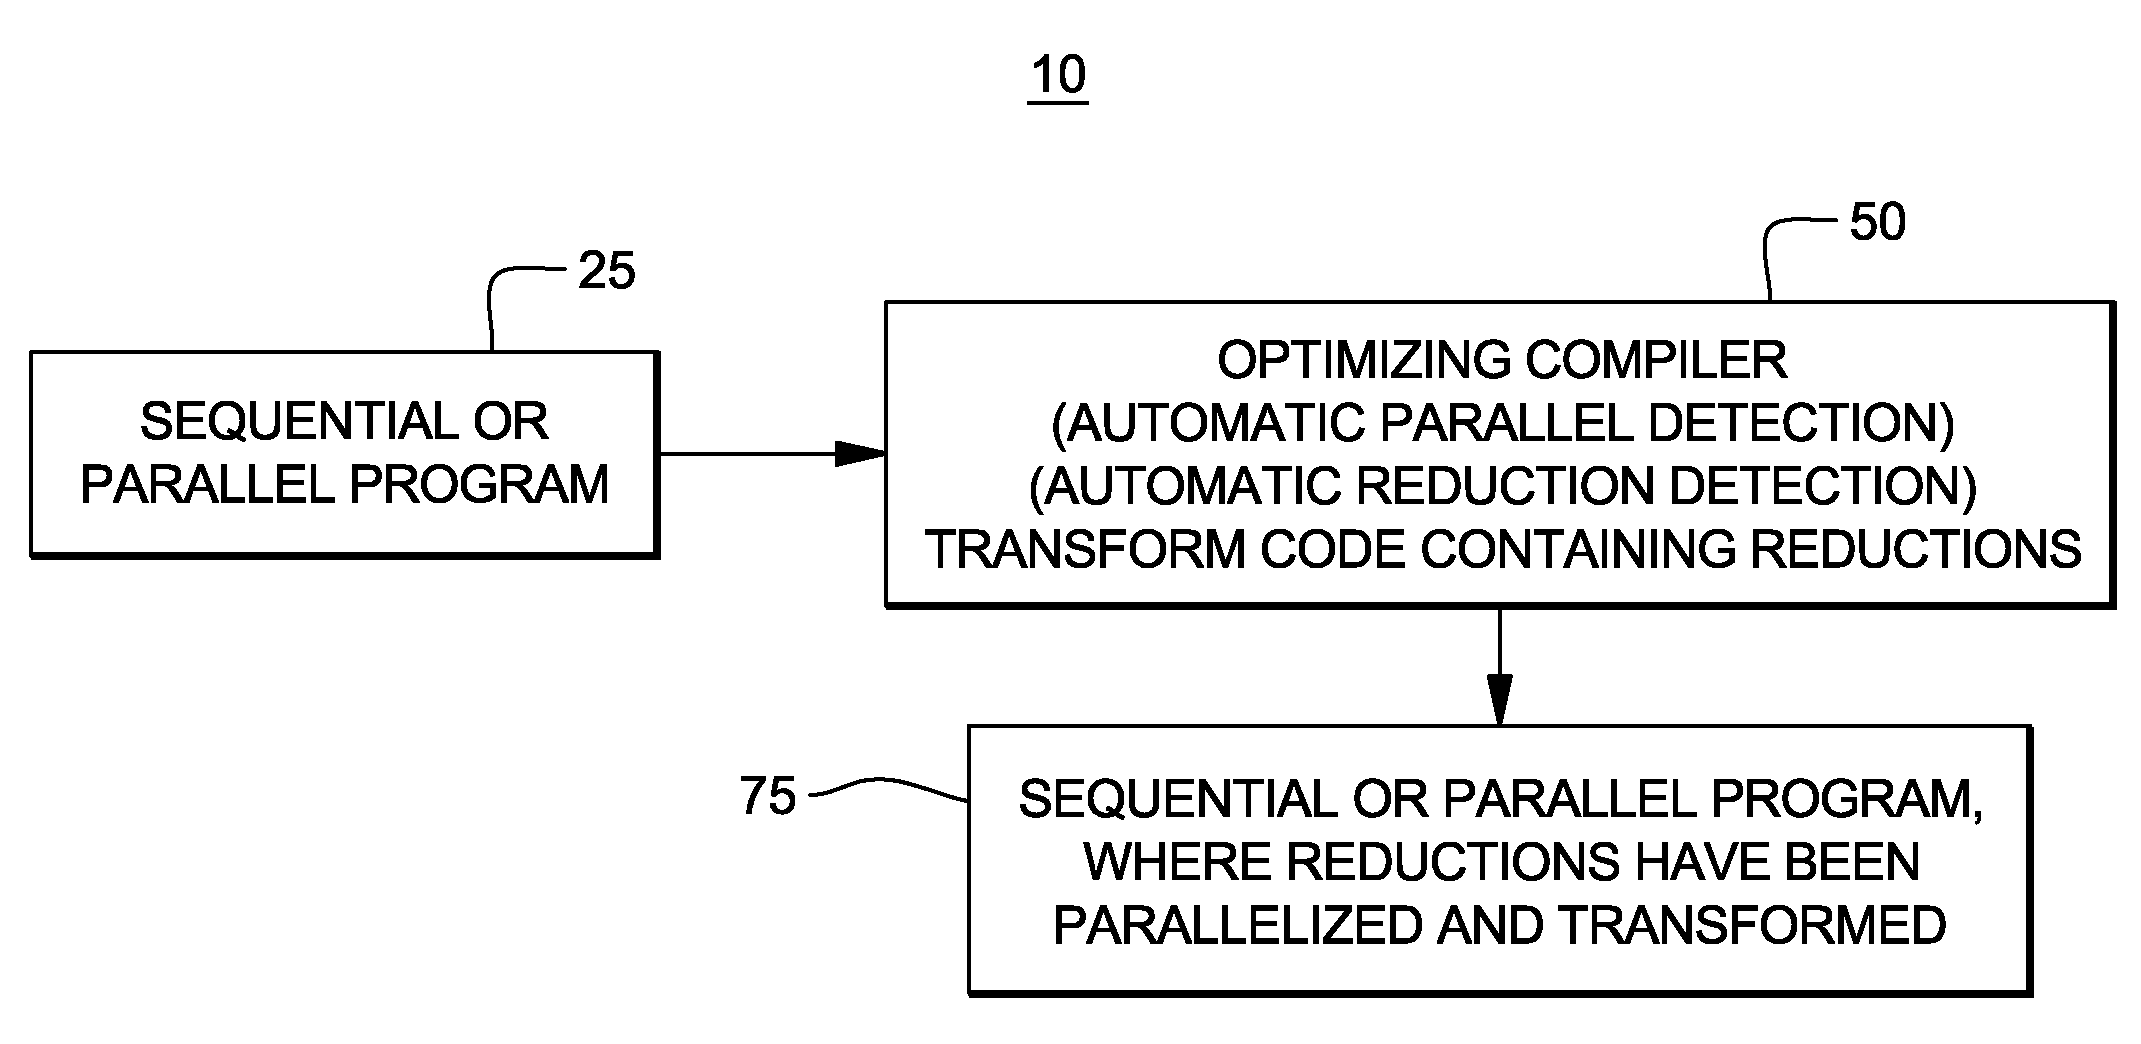 Parallelization of irregular reductions via parallel building and exploitation of conflict-free units of work at runtime